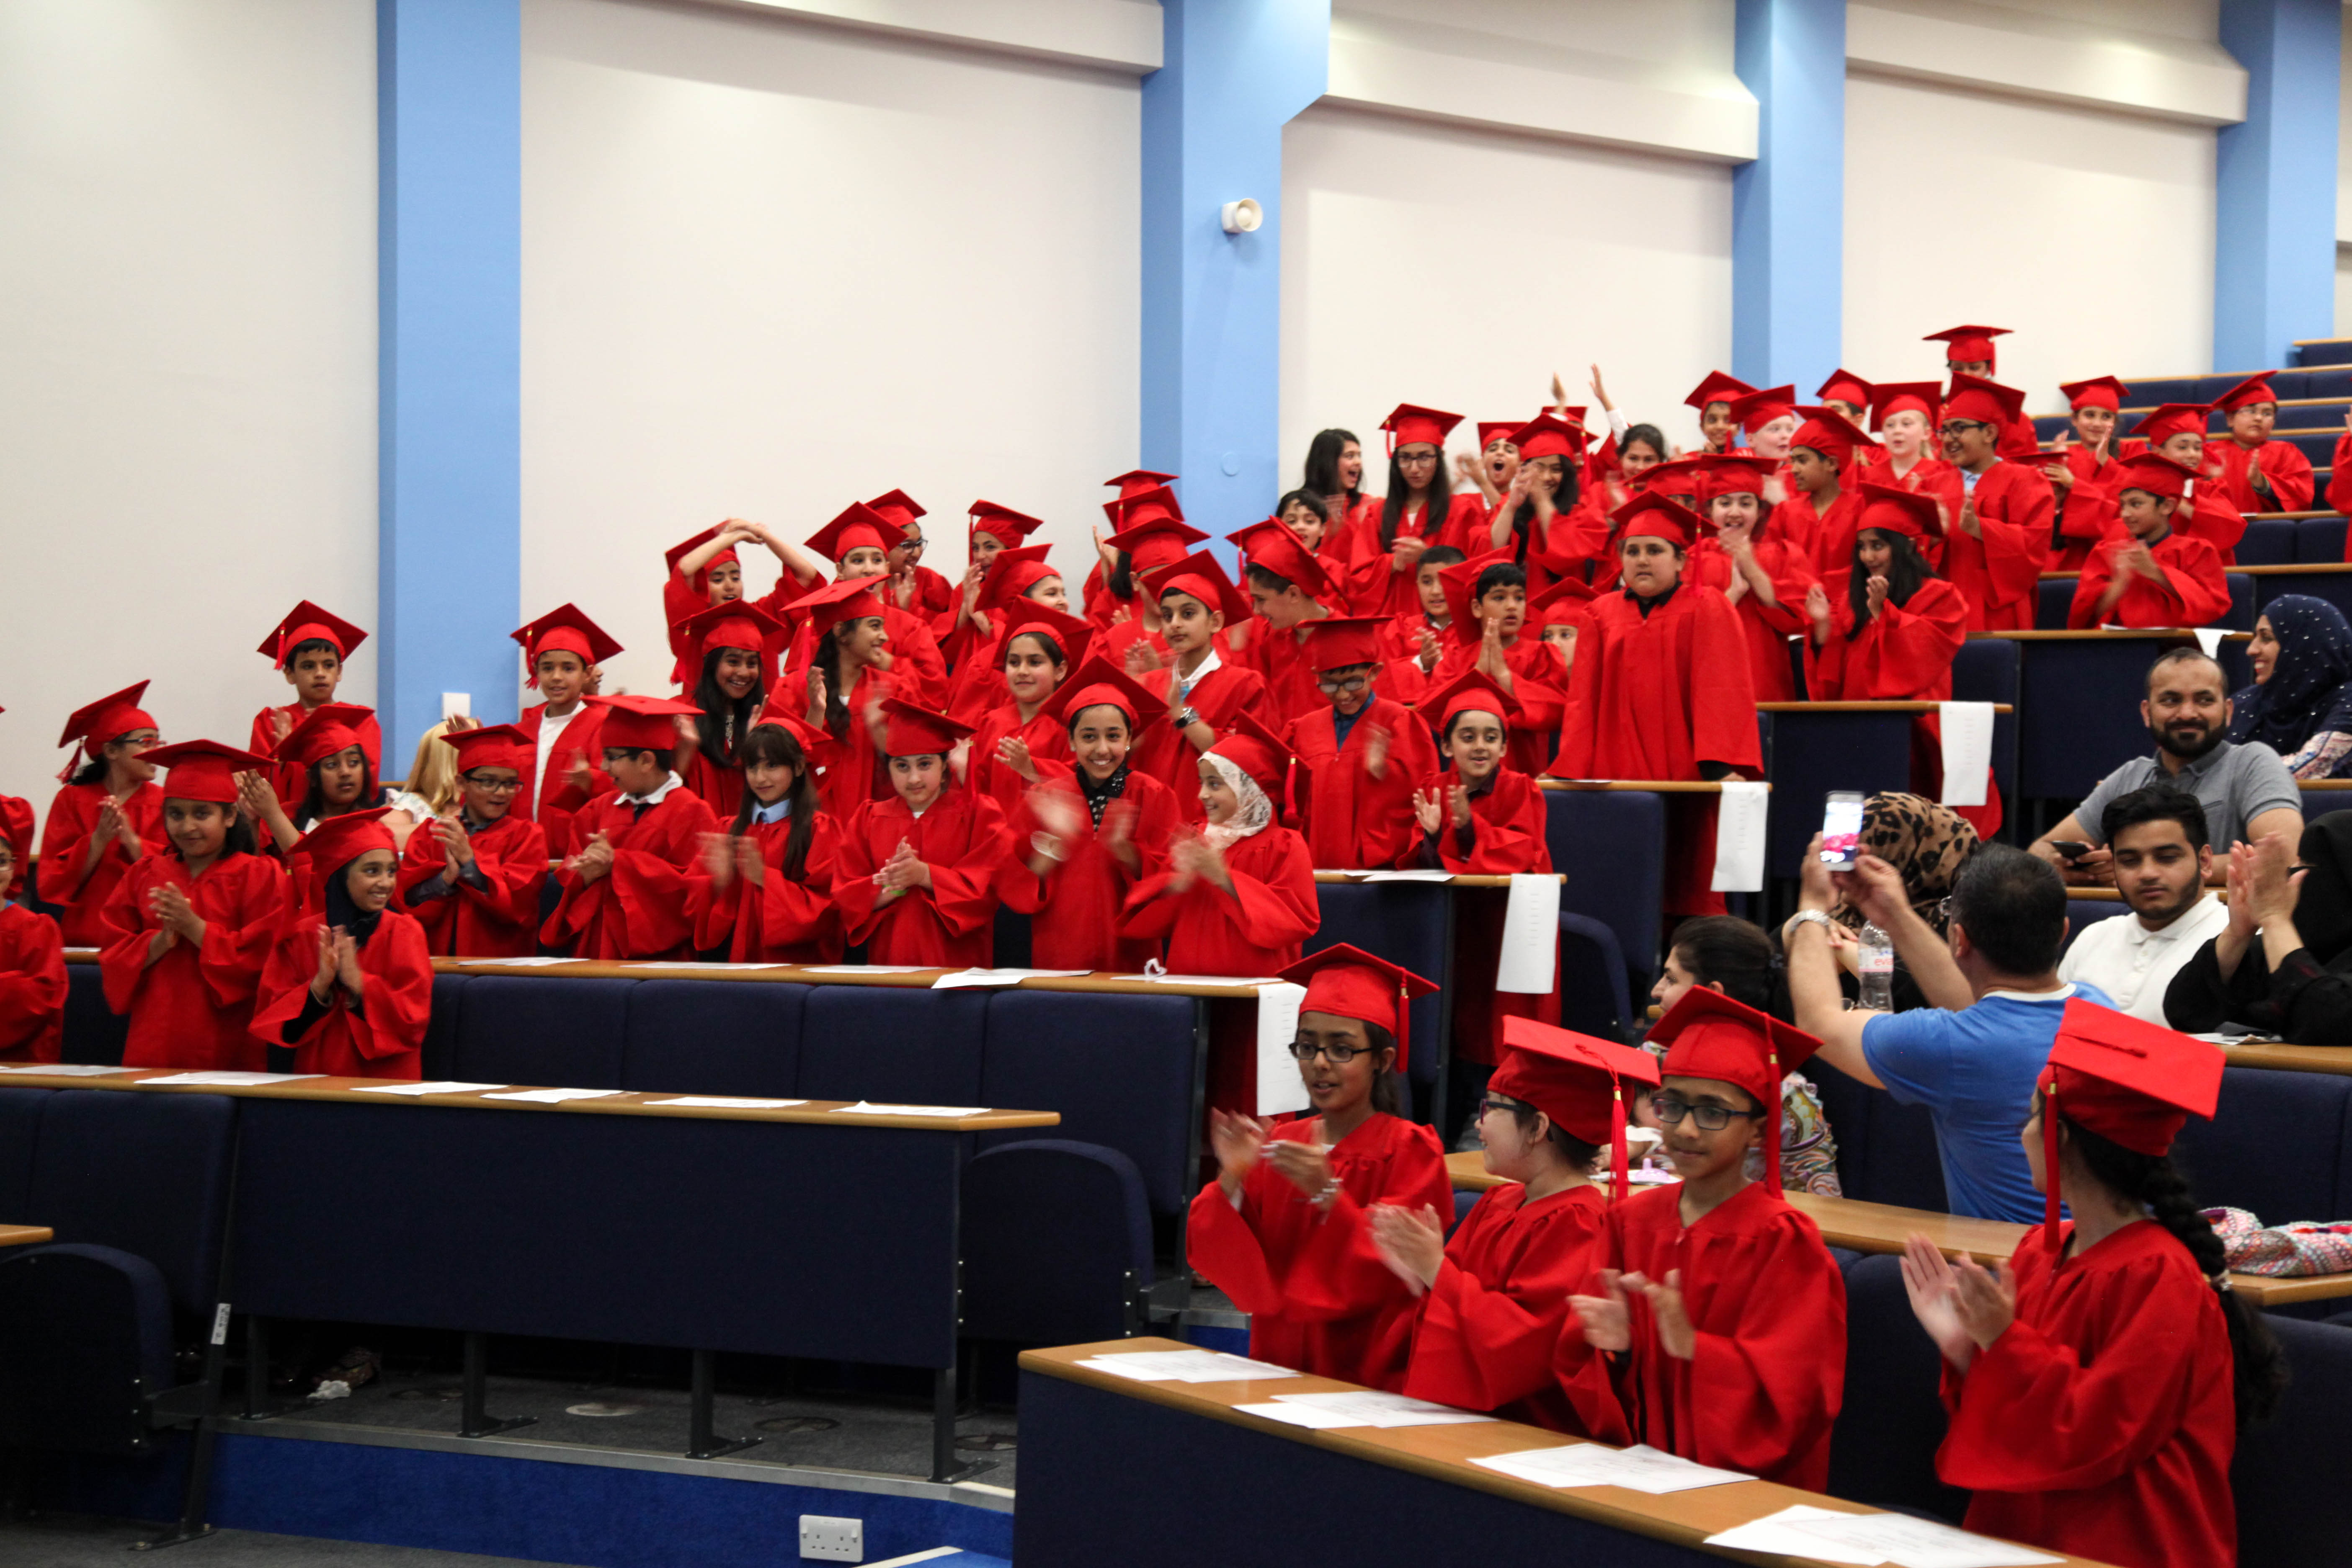 Students sat in a lecture theatre at the Children's University Programme graduation ceremony.